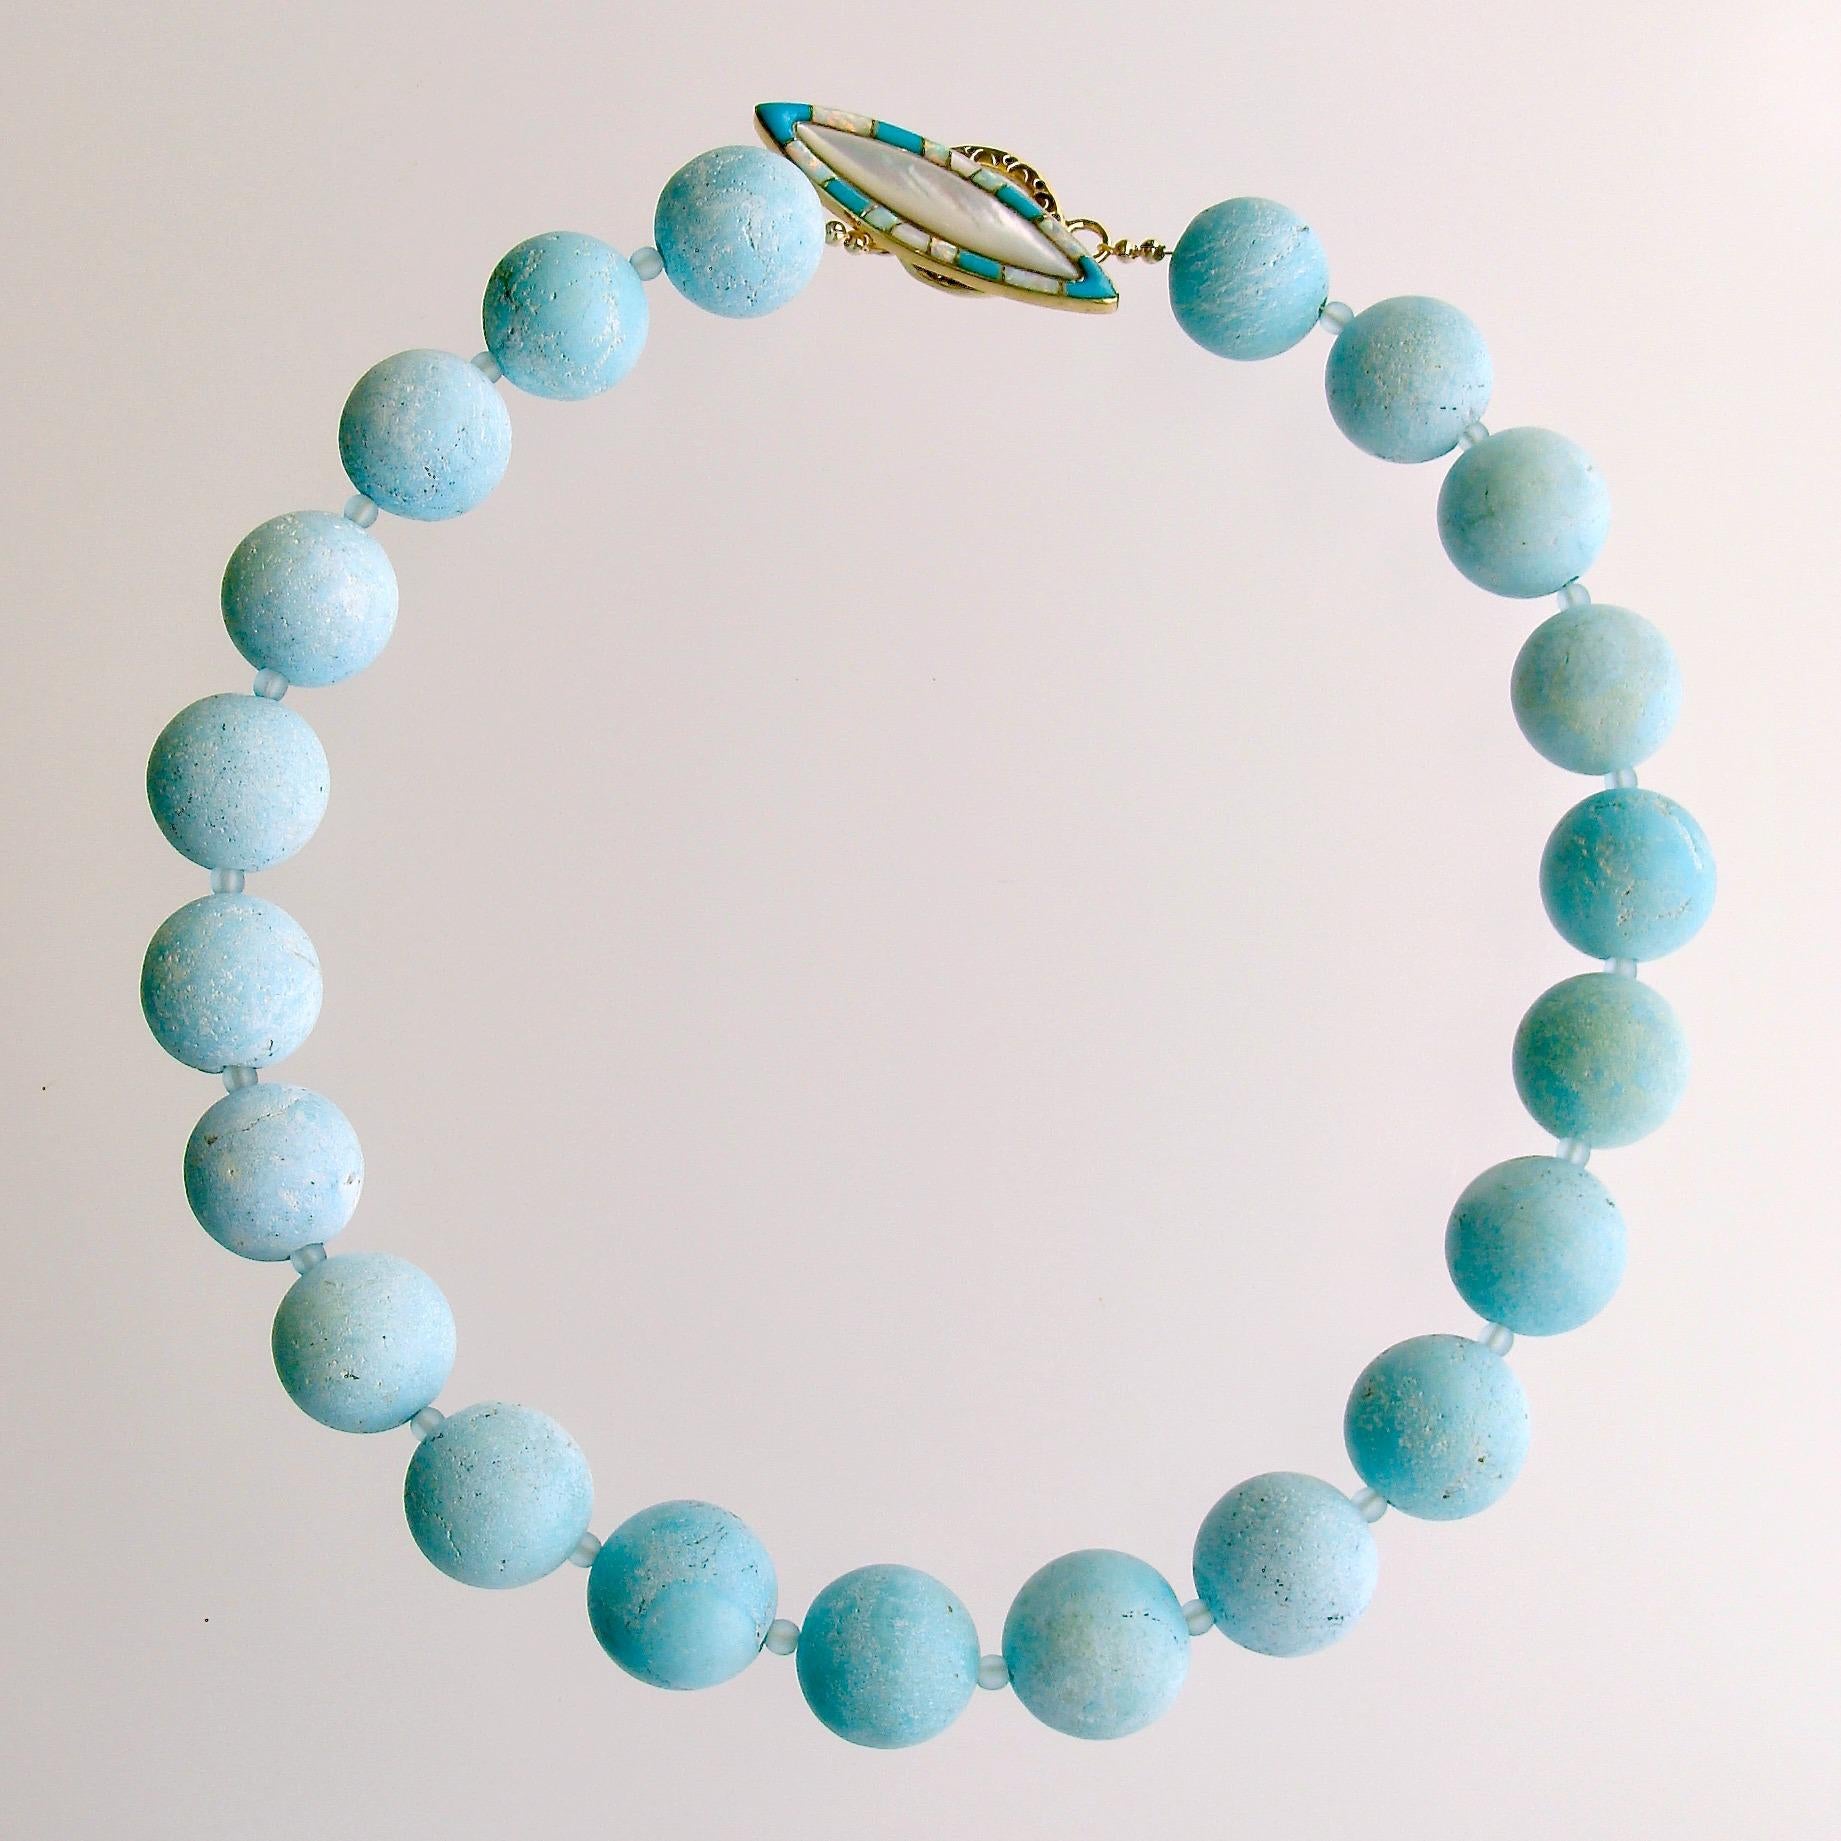 Luxe, highly-coveted and collectable 20mm matte Naco Turquoise beads, with their suede-like aqua finish, are further enhanced with a most unique marquise-shaped inlaid toggle clasp of Mother-of-pearl and opal.  Turquoise stones of this size are not